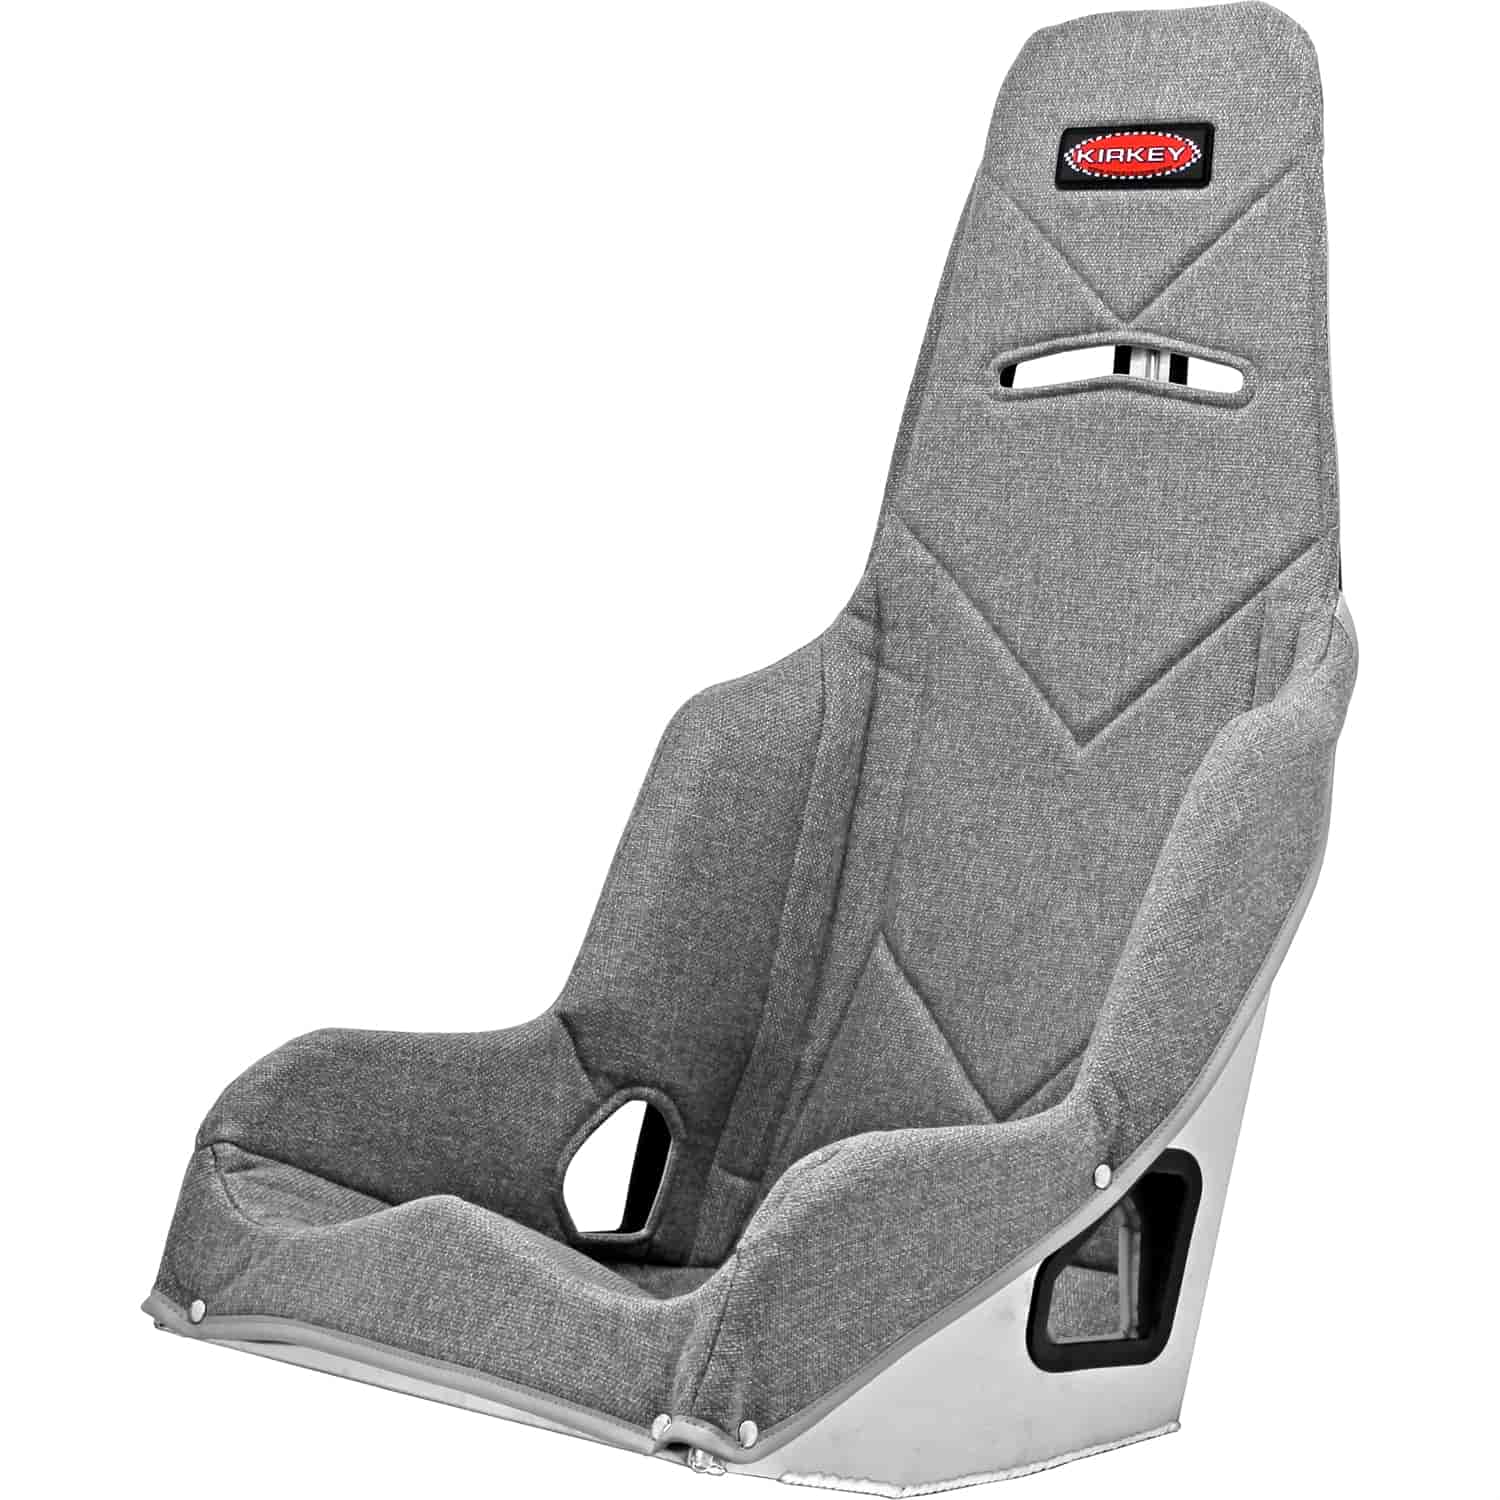 55 Series Pro Street Drag Seat Cover 17" Hip Width